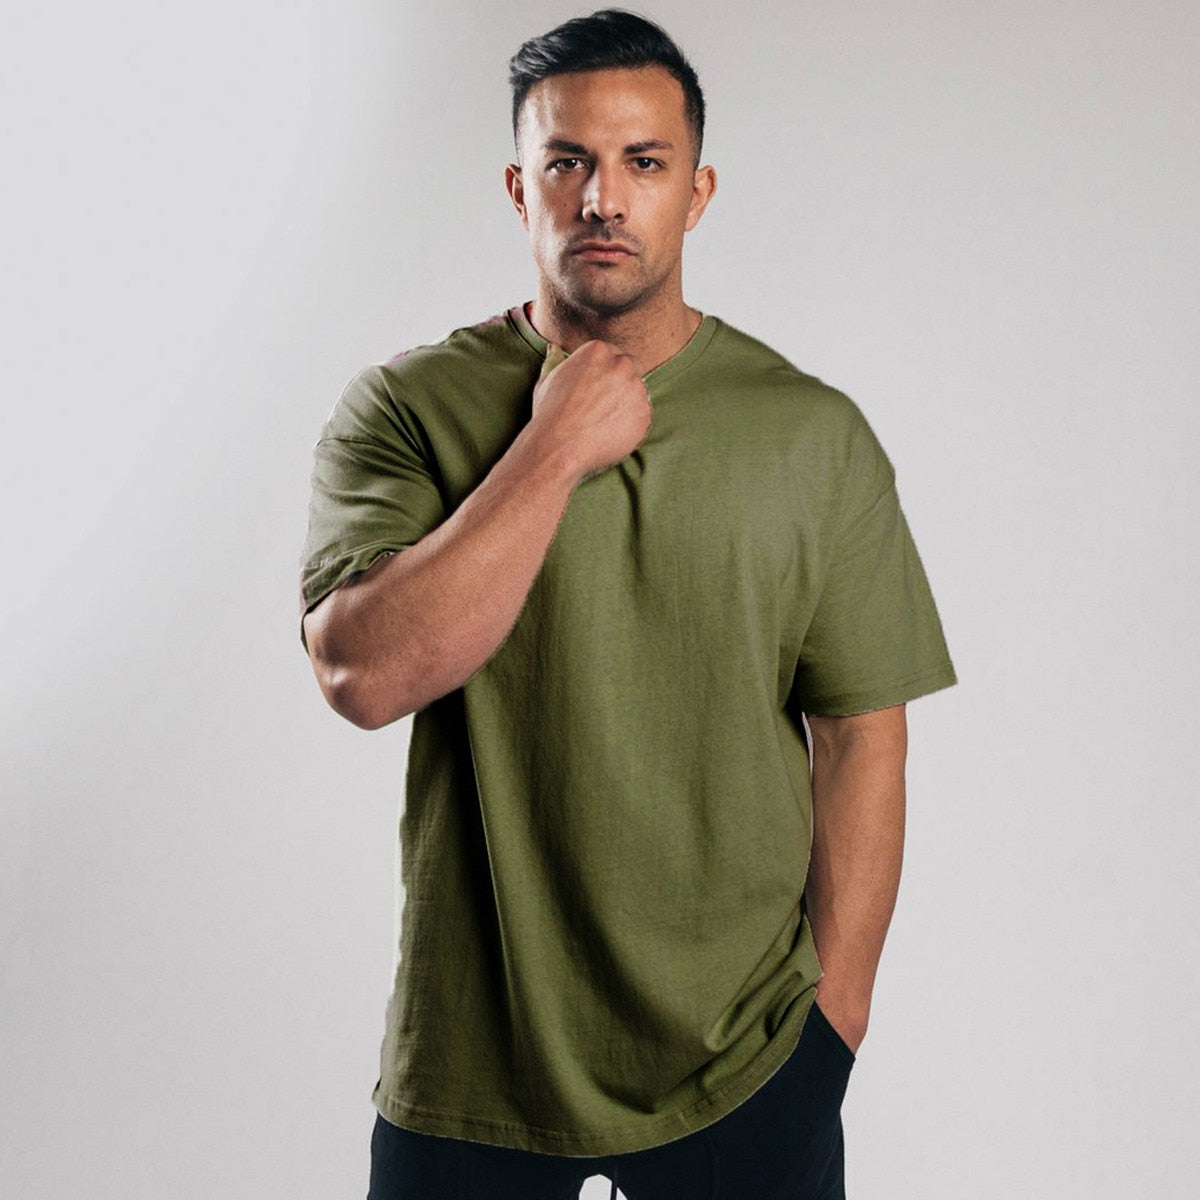 Cotton Casual T-shirt Men Short Sleeve Loose Black Tees Male Gym Fitness Tops Summer Sport Training Crossfit Clothing Plus Large